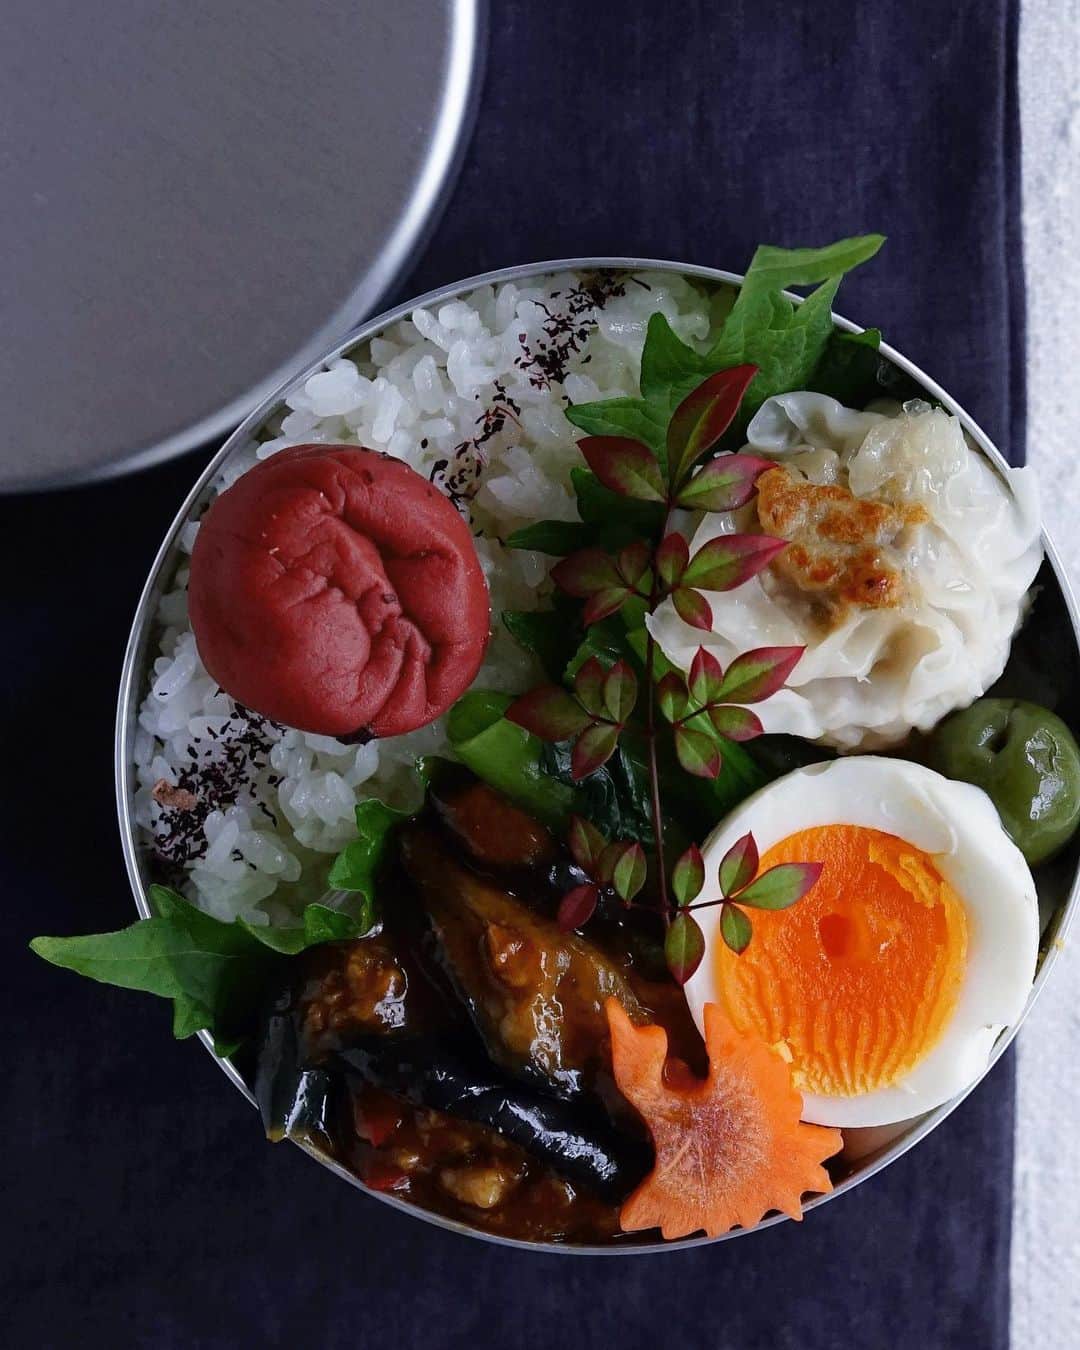 Ryoko Yunokiのインスタグラム：「+ + + Spicy eggplant and minced meat stir-fry bento/麻婆茄子弁当 . *rice and umeboshi *grilled shumai dumpling *spicy eggplant and minced meat stir-fry *hard-boiled egg *green olive *blanched komatsuna leaves salad with mustard dressing . ＊ご飯と梅干し ＊麻婆茄子 ＊焼き焼売 ＊ゆで卵 ＊オリーブ ＊小松菜の辛し和え + + + #bento #お弁当 #丸の内弁当 #f52grams #アルミ弁当」